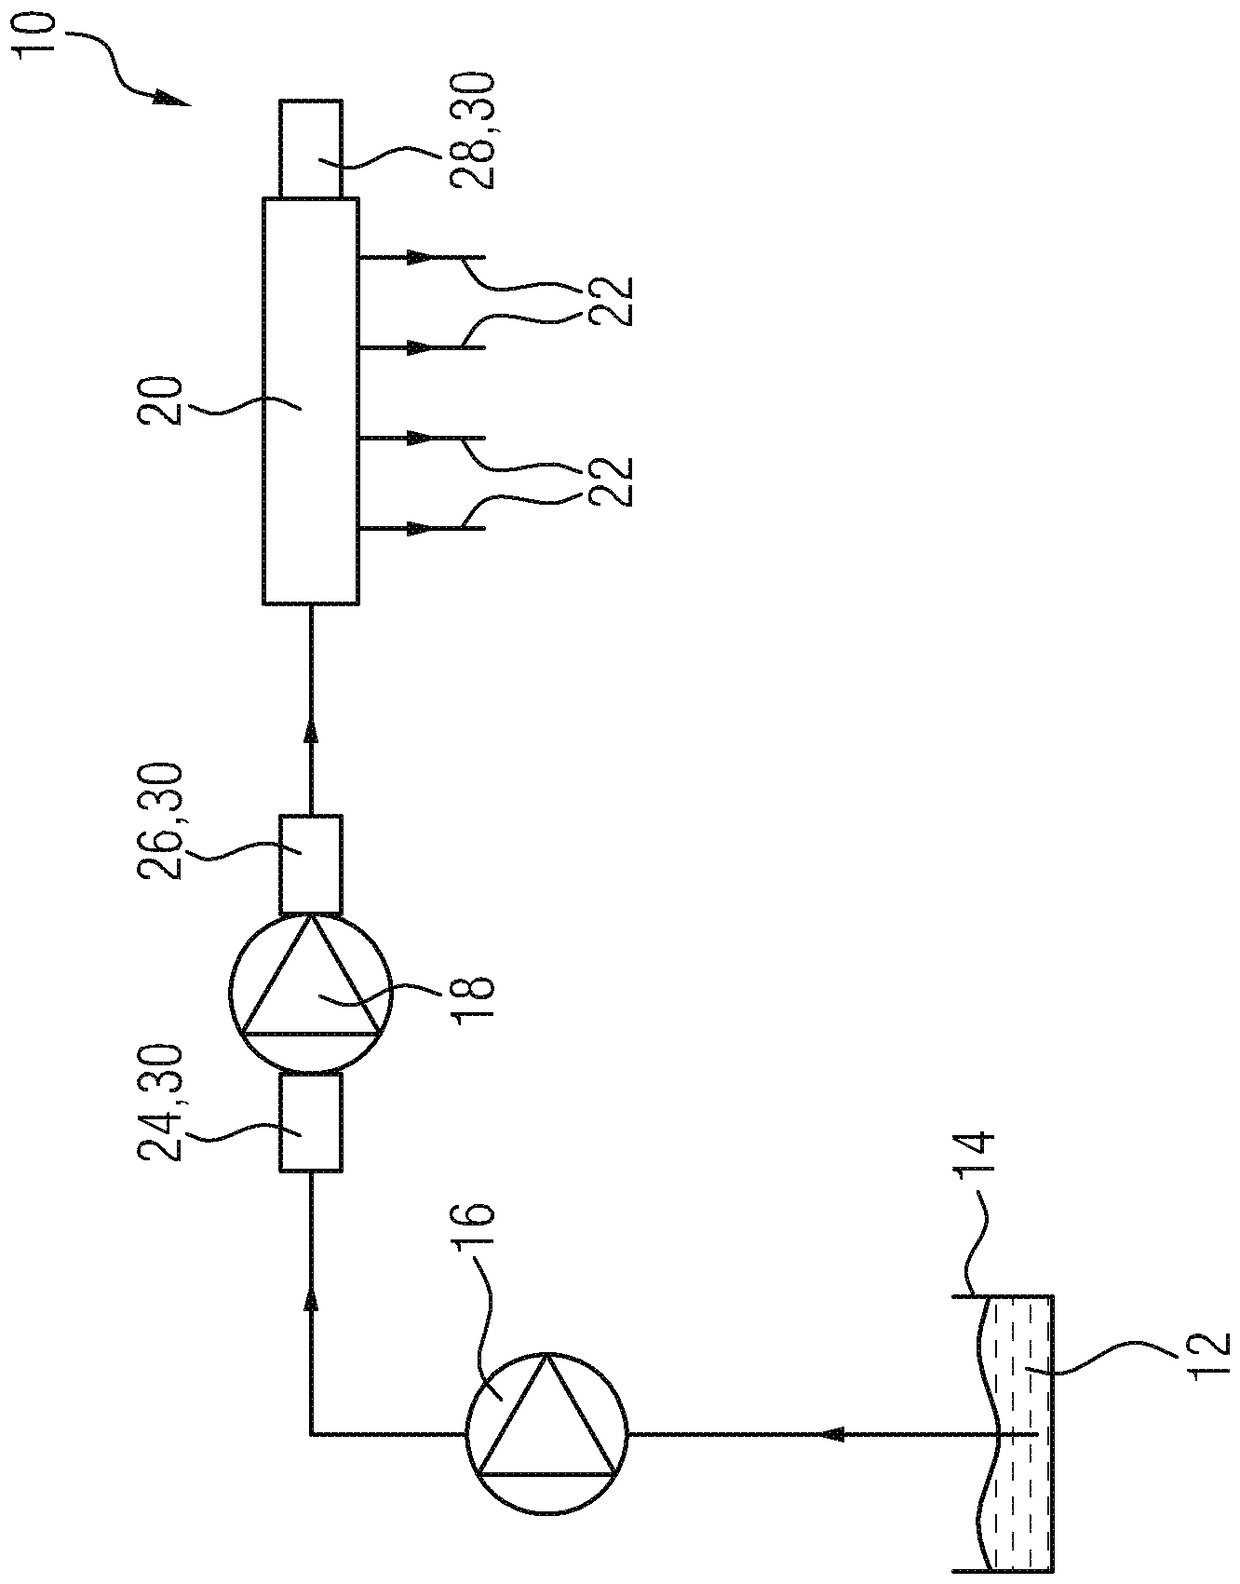 Electromagnetic switching valve and high-pressure fuel pump